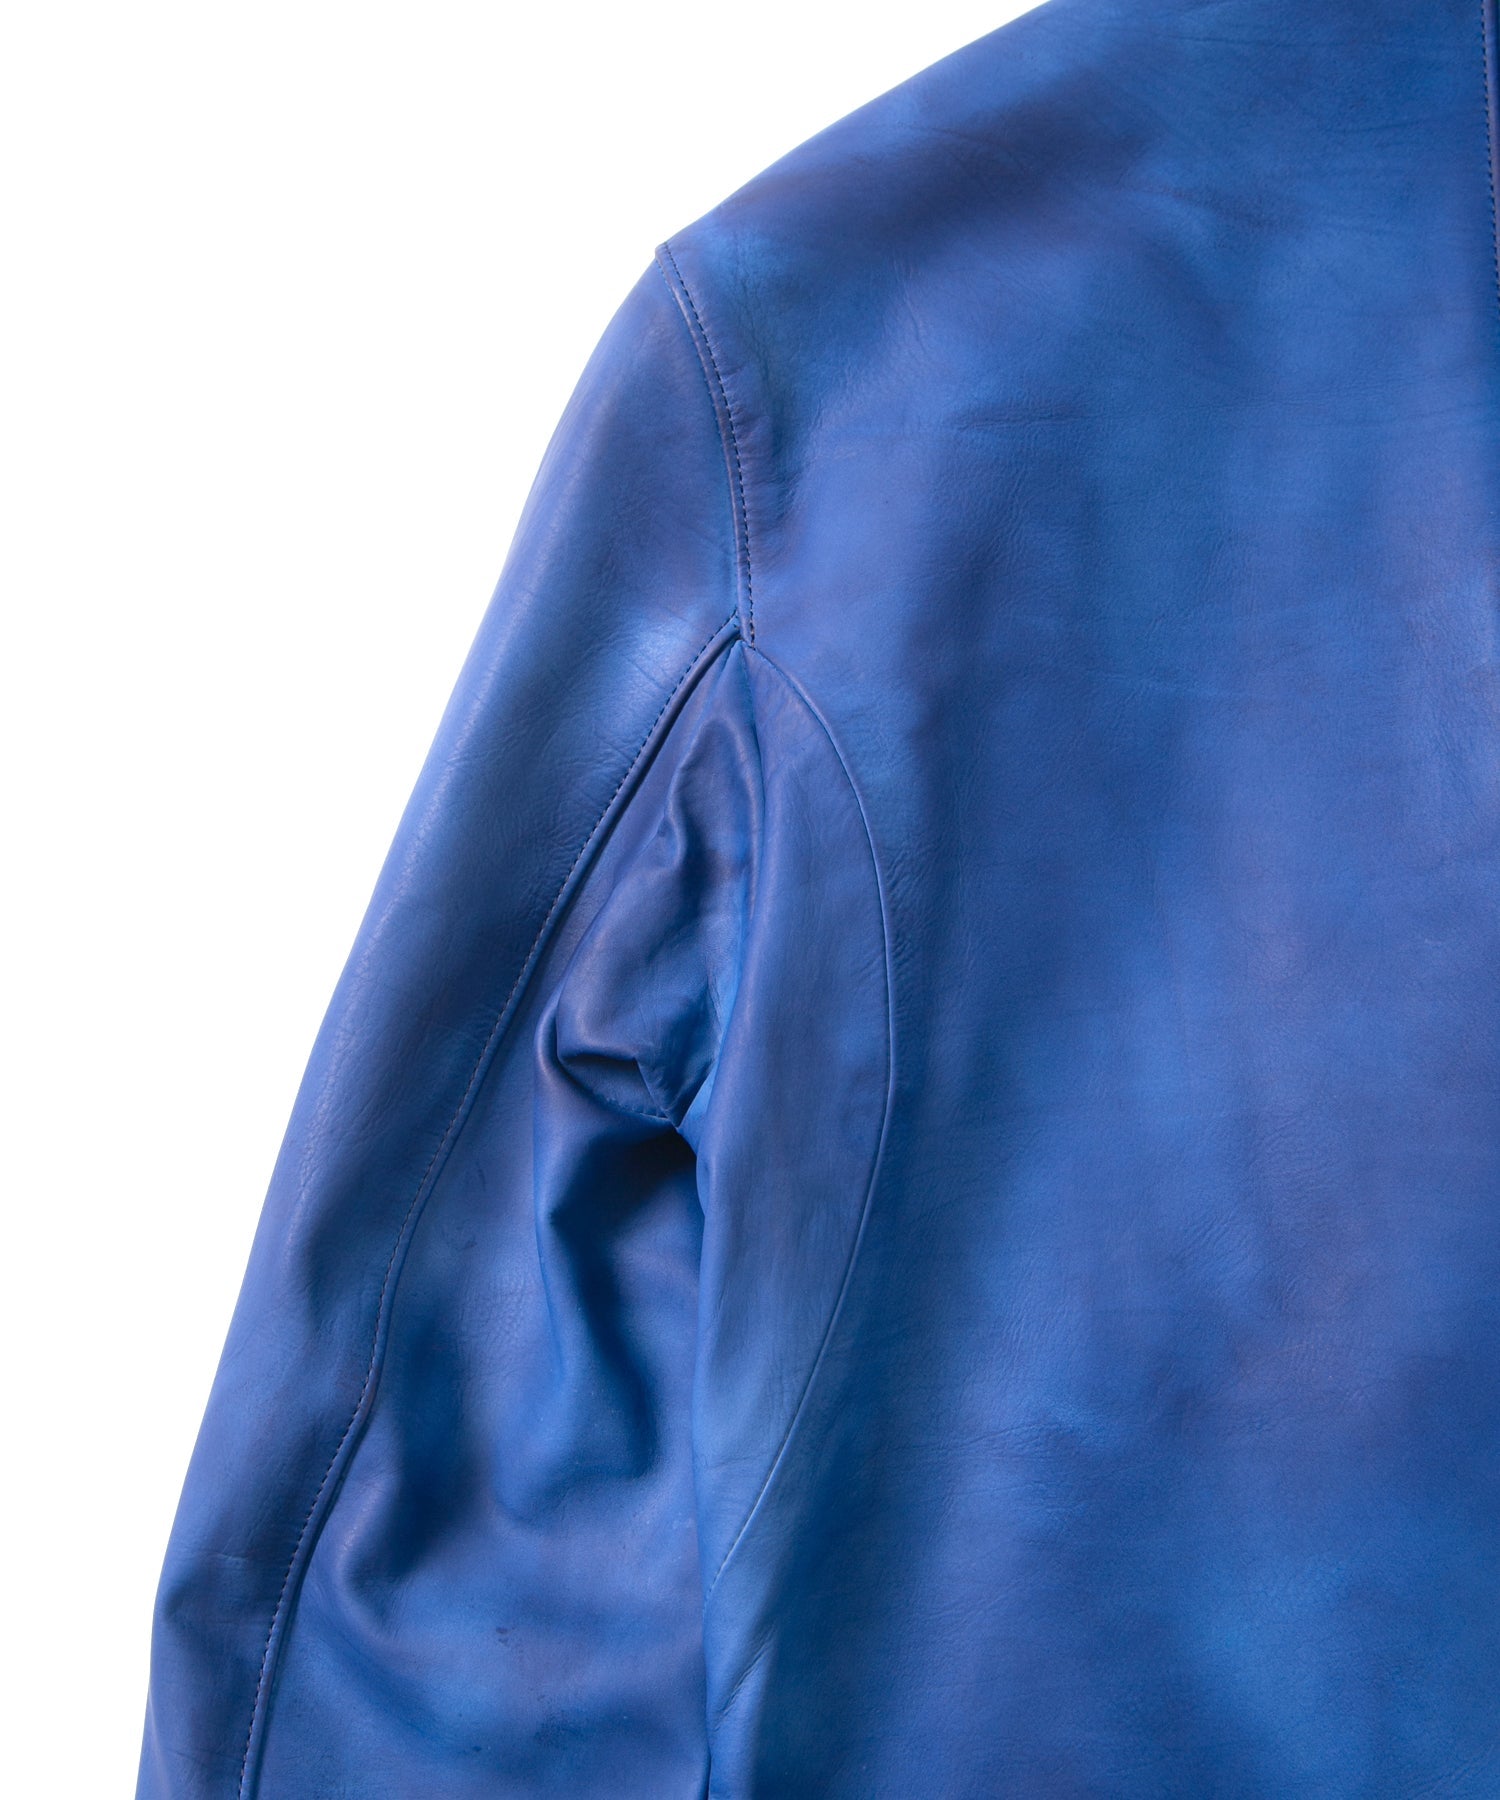 Load image into Gallery viewer, Vegetable Full tanning Calfskin Garment Burning Dyed RAVEN Double Riders Jacket - ROYAL BLUE